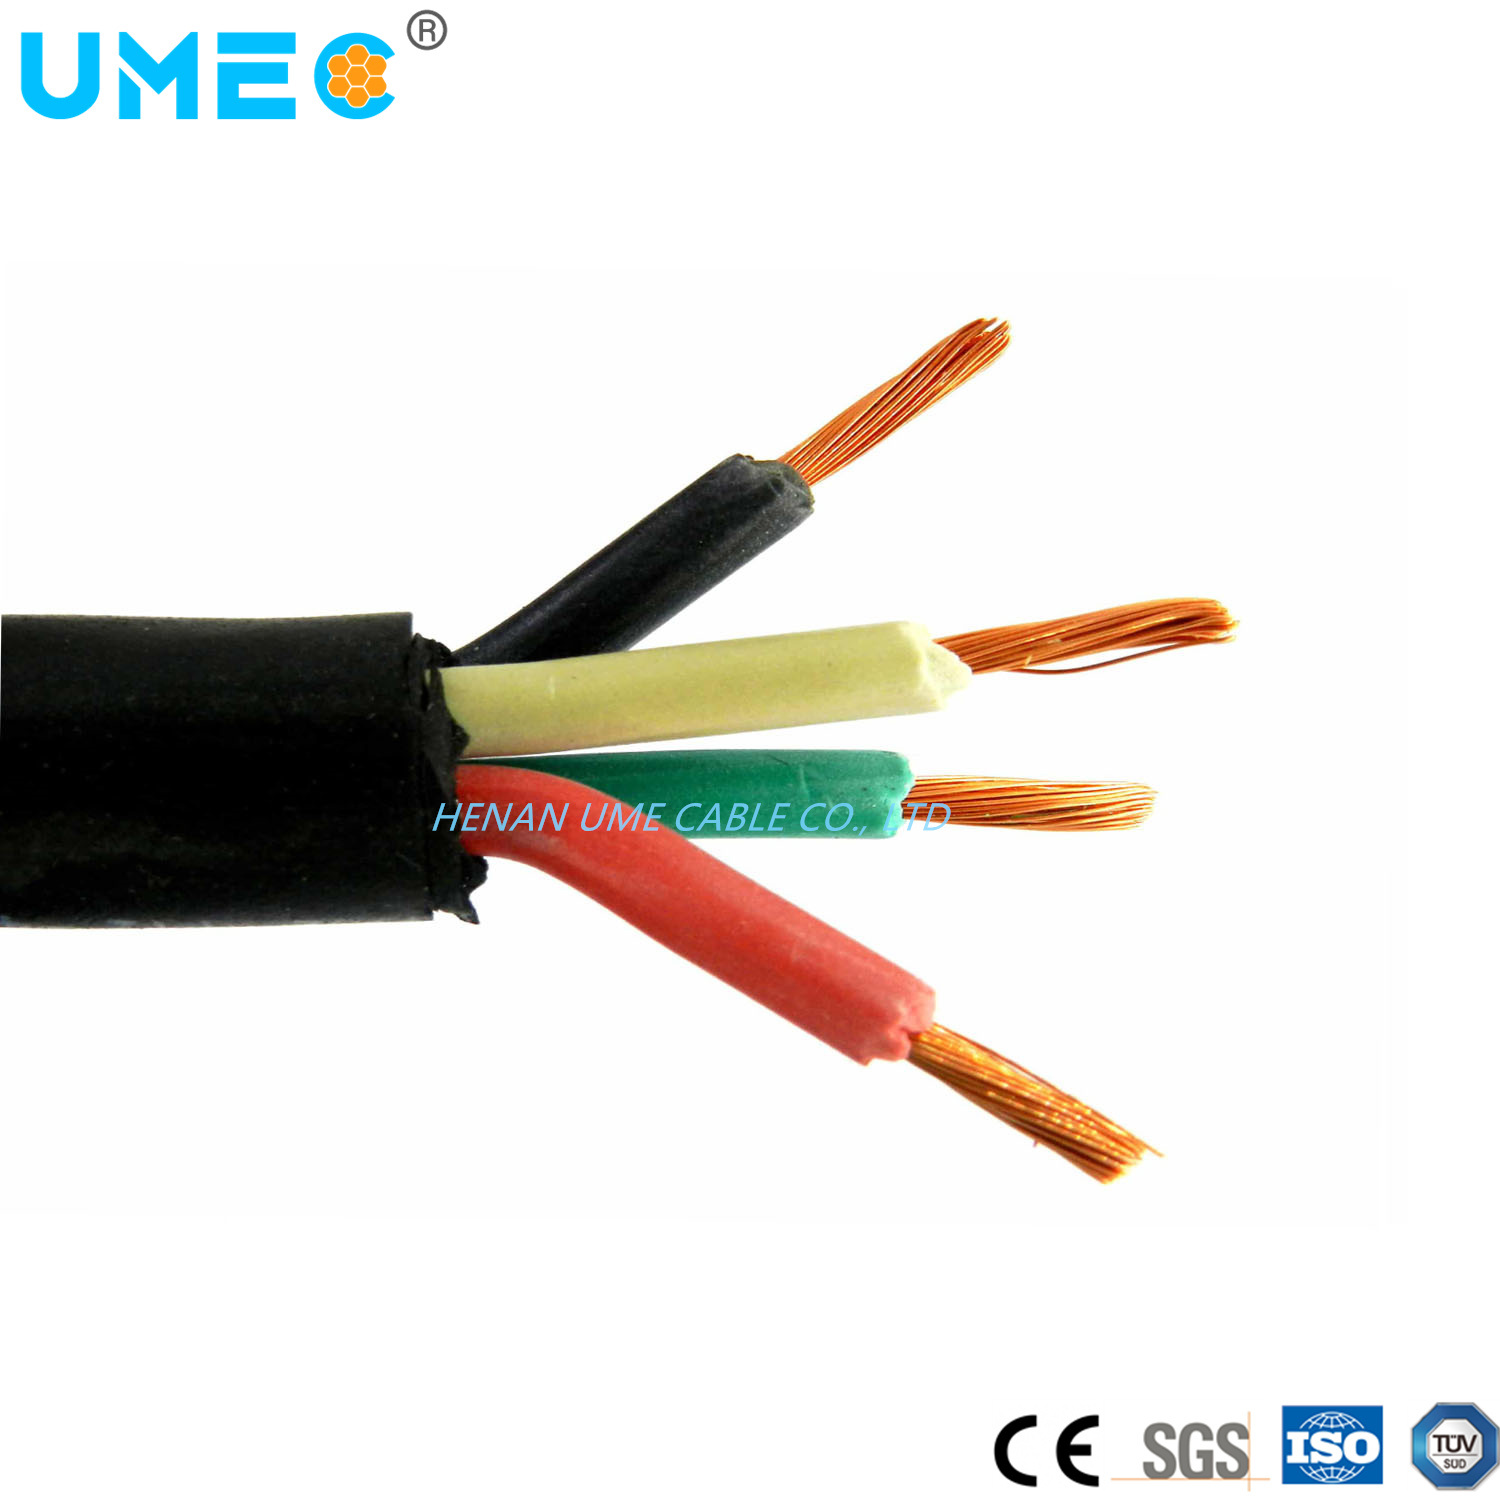 
                Low Voltage 300V 600V 14/2 12/2 10/2 Flexible Copper Epr Insulated CPE Sheathed Soow Sow Sjoow Cable
            